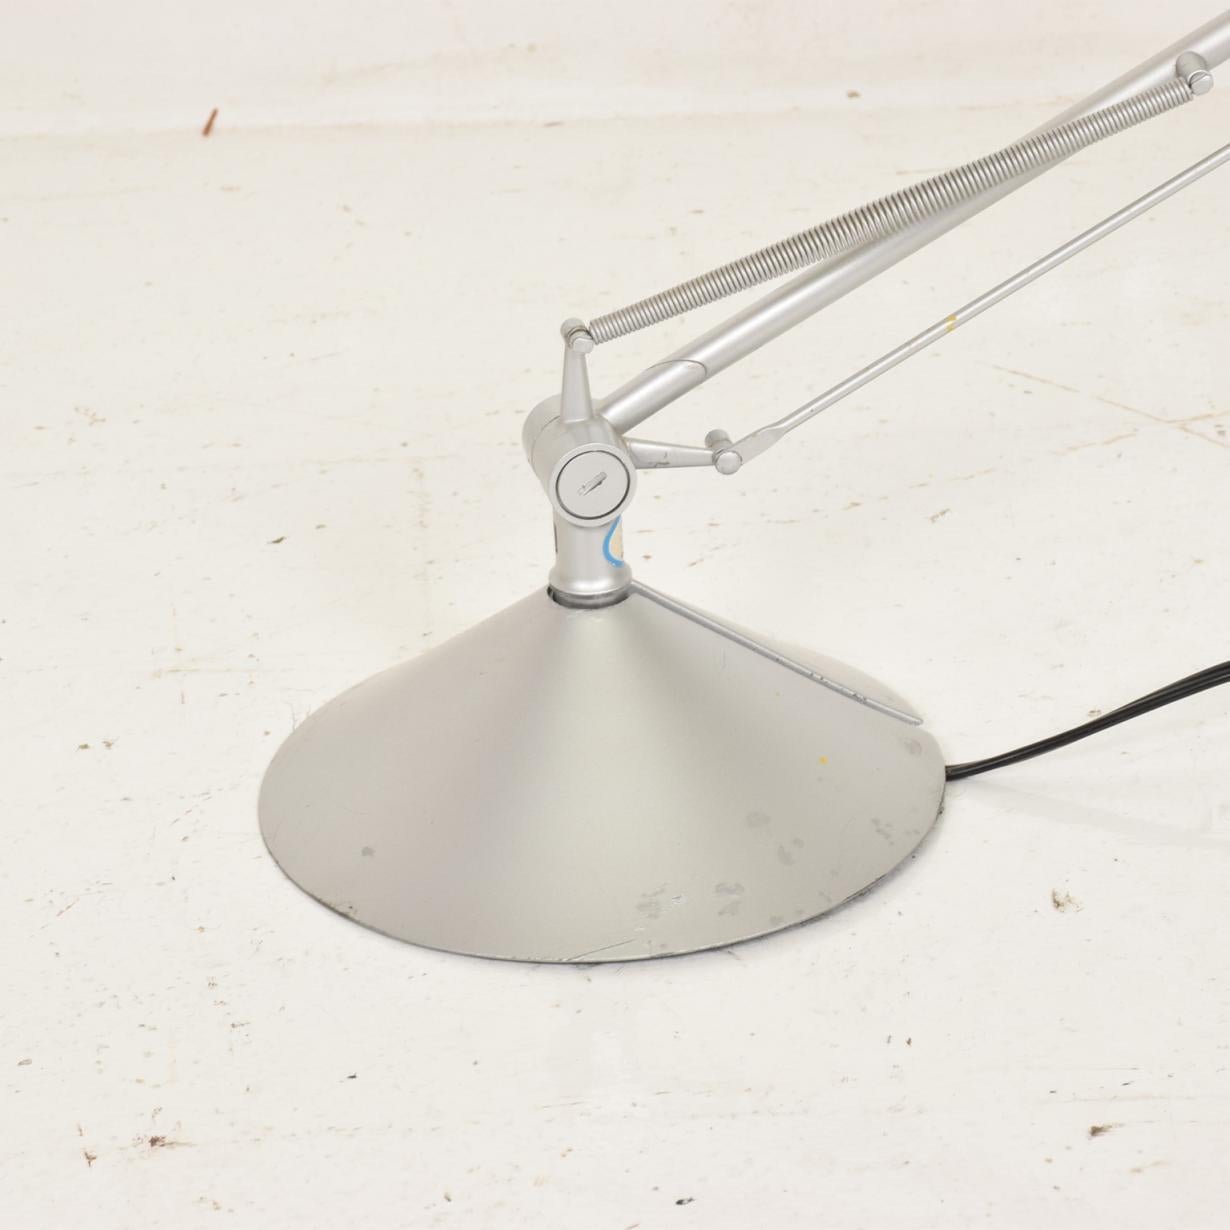 French Archimoon modern adjustable table lamp by noted French designer Philippe Starck for FLOS USA created by Philippe Starck in 2004 smart innovative modern design providing diffused and direct light, it has a fully articulated silver aluminum arm